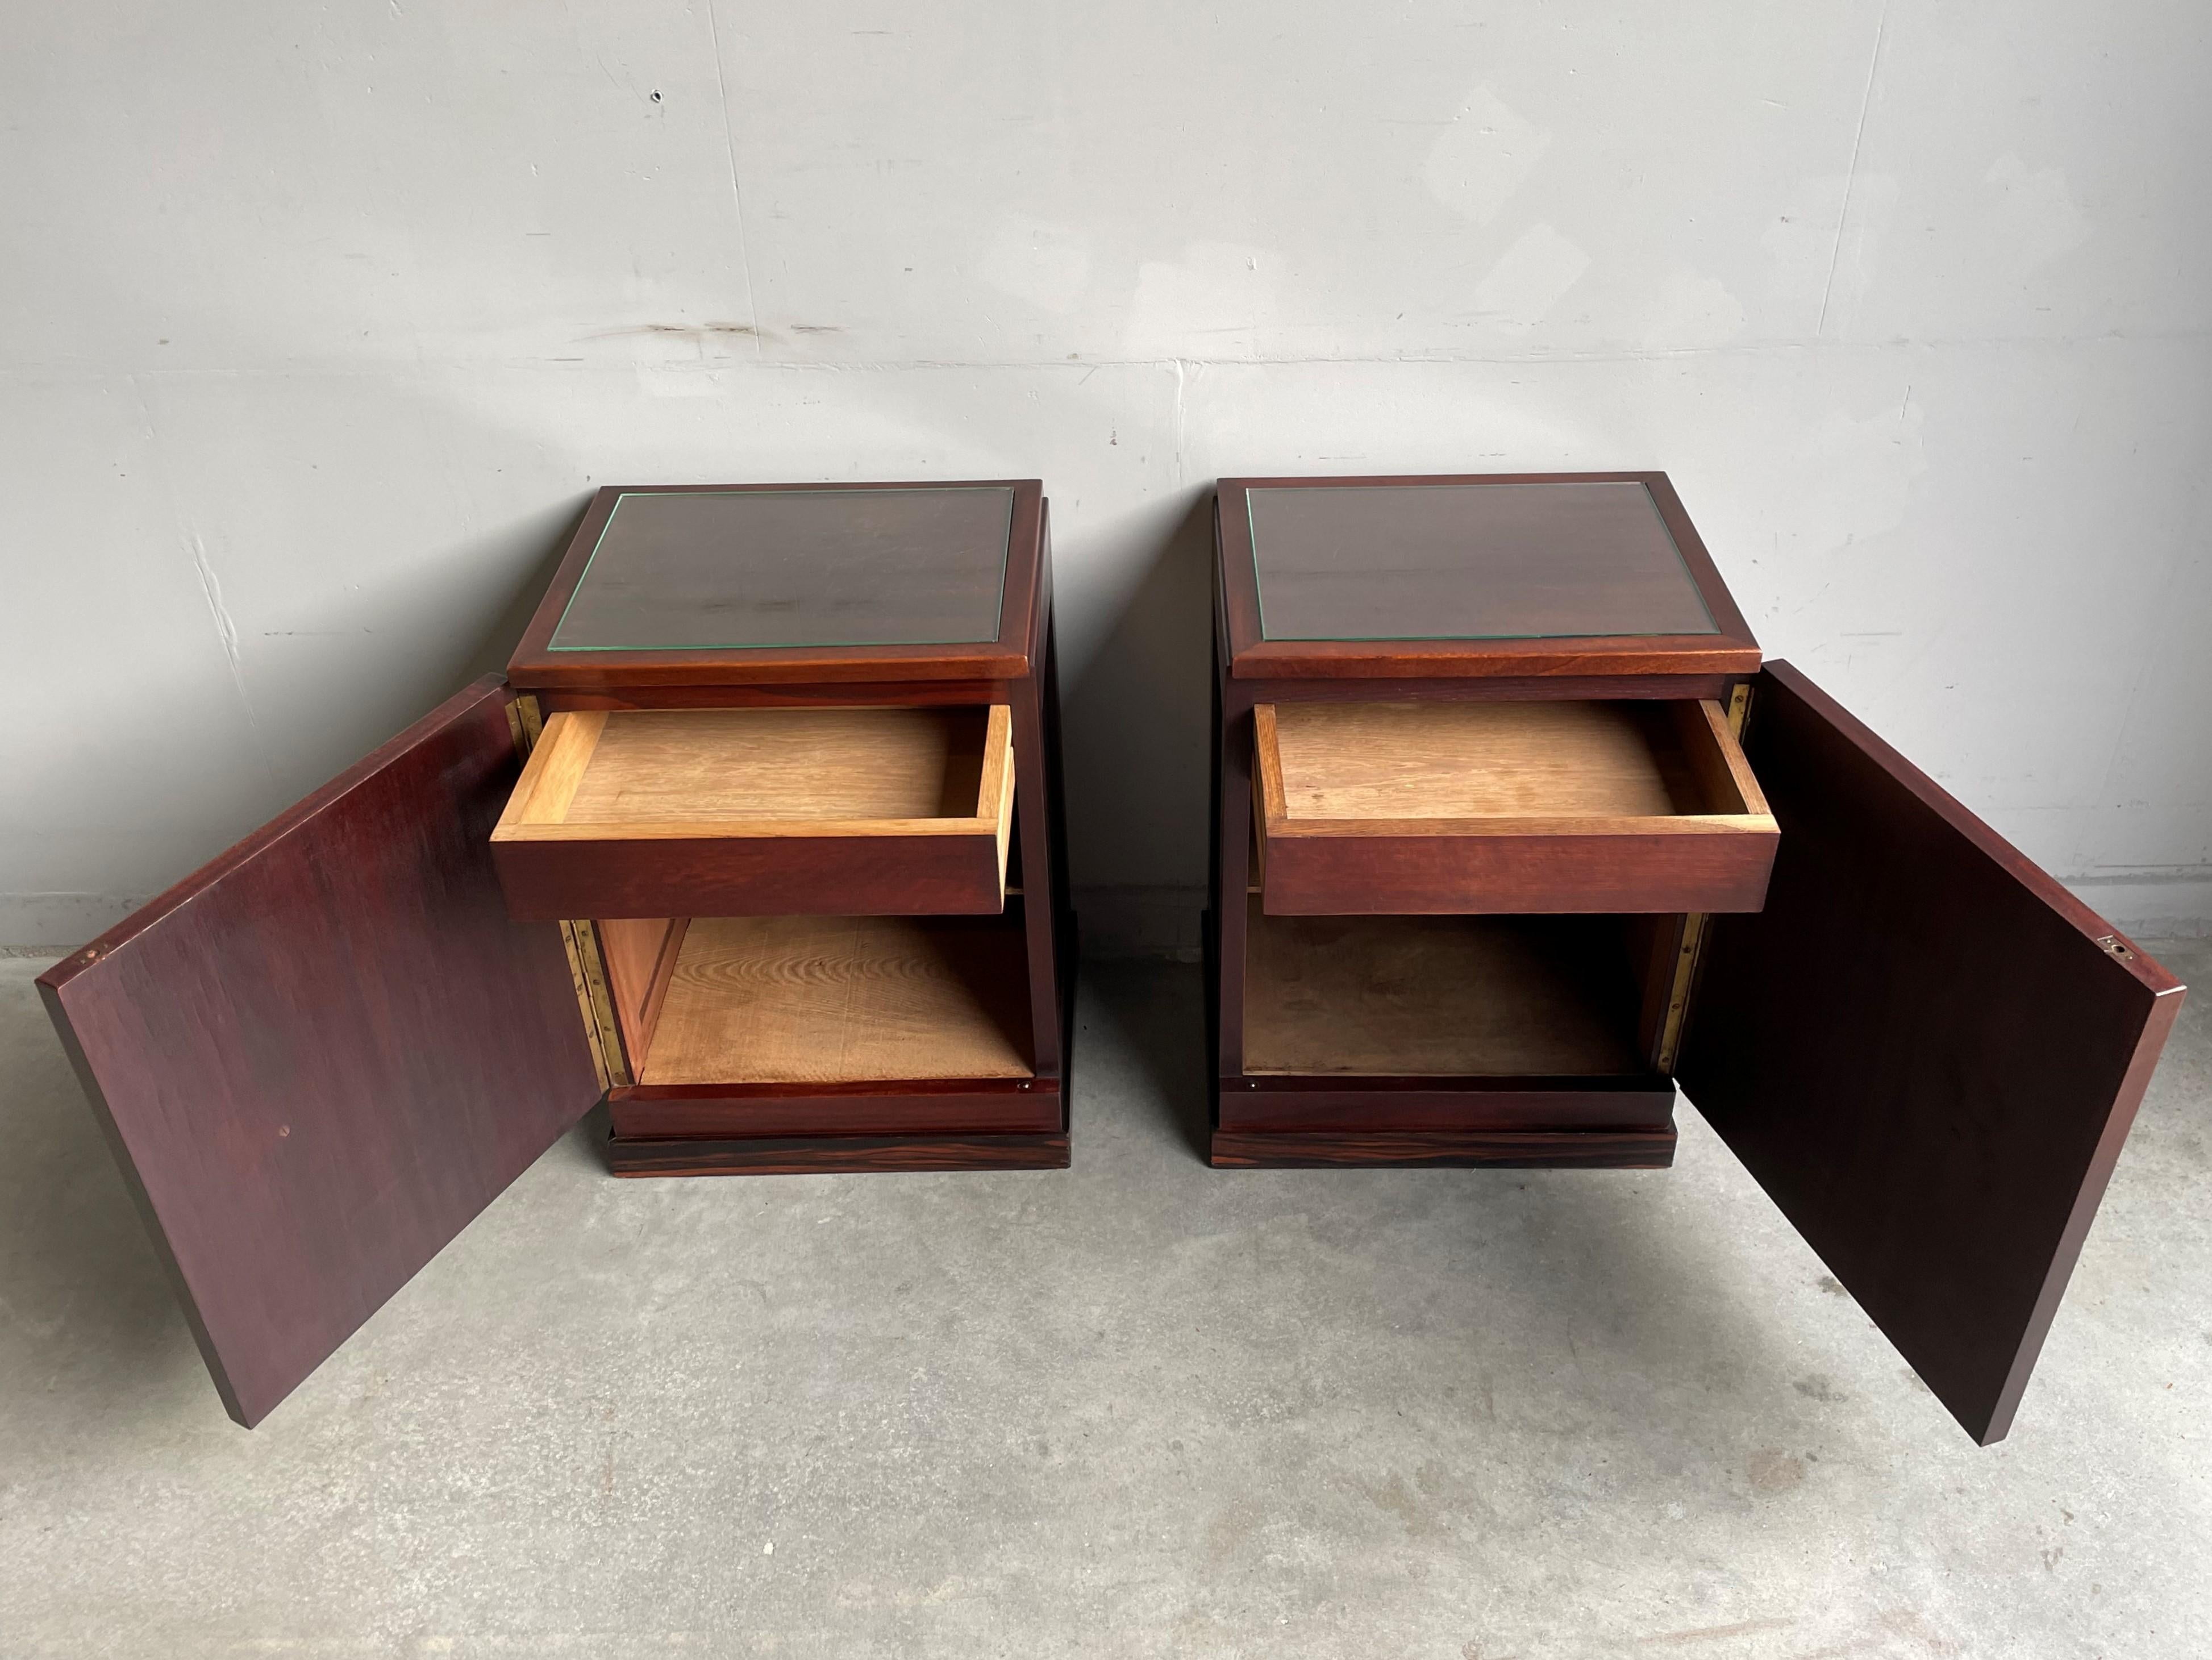 Stunning Dutch Arts and Crafts Night Stands / Bedside Tables with Drawer Inside In Excellent Condition For Sale In Lisse, NL